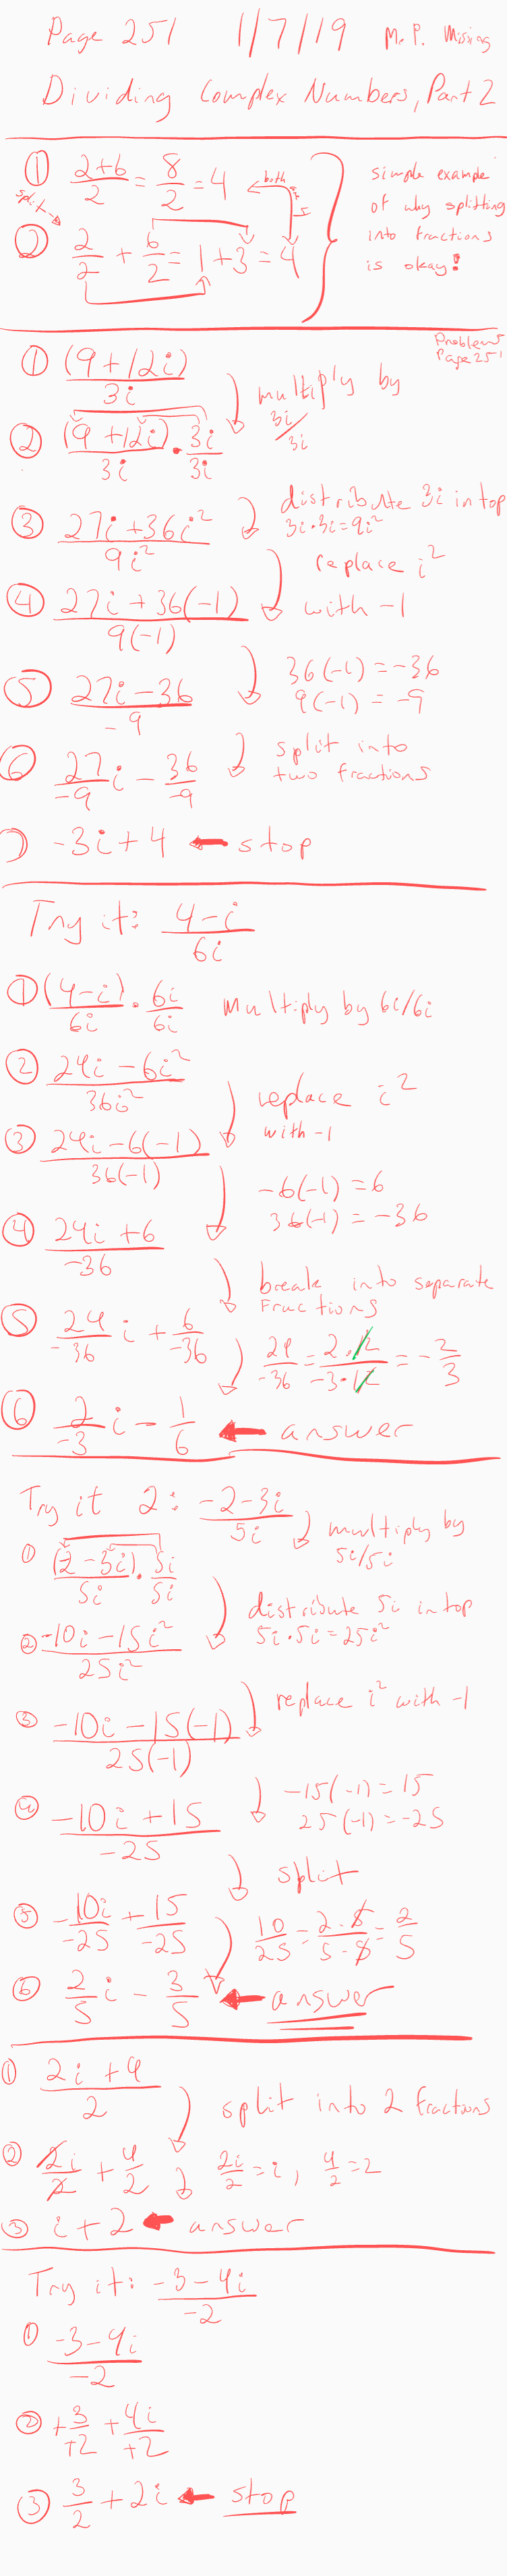 Dividing complex numbers of the form (a+bi) over ci